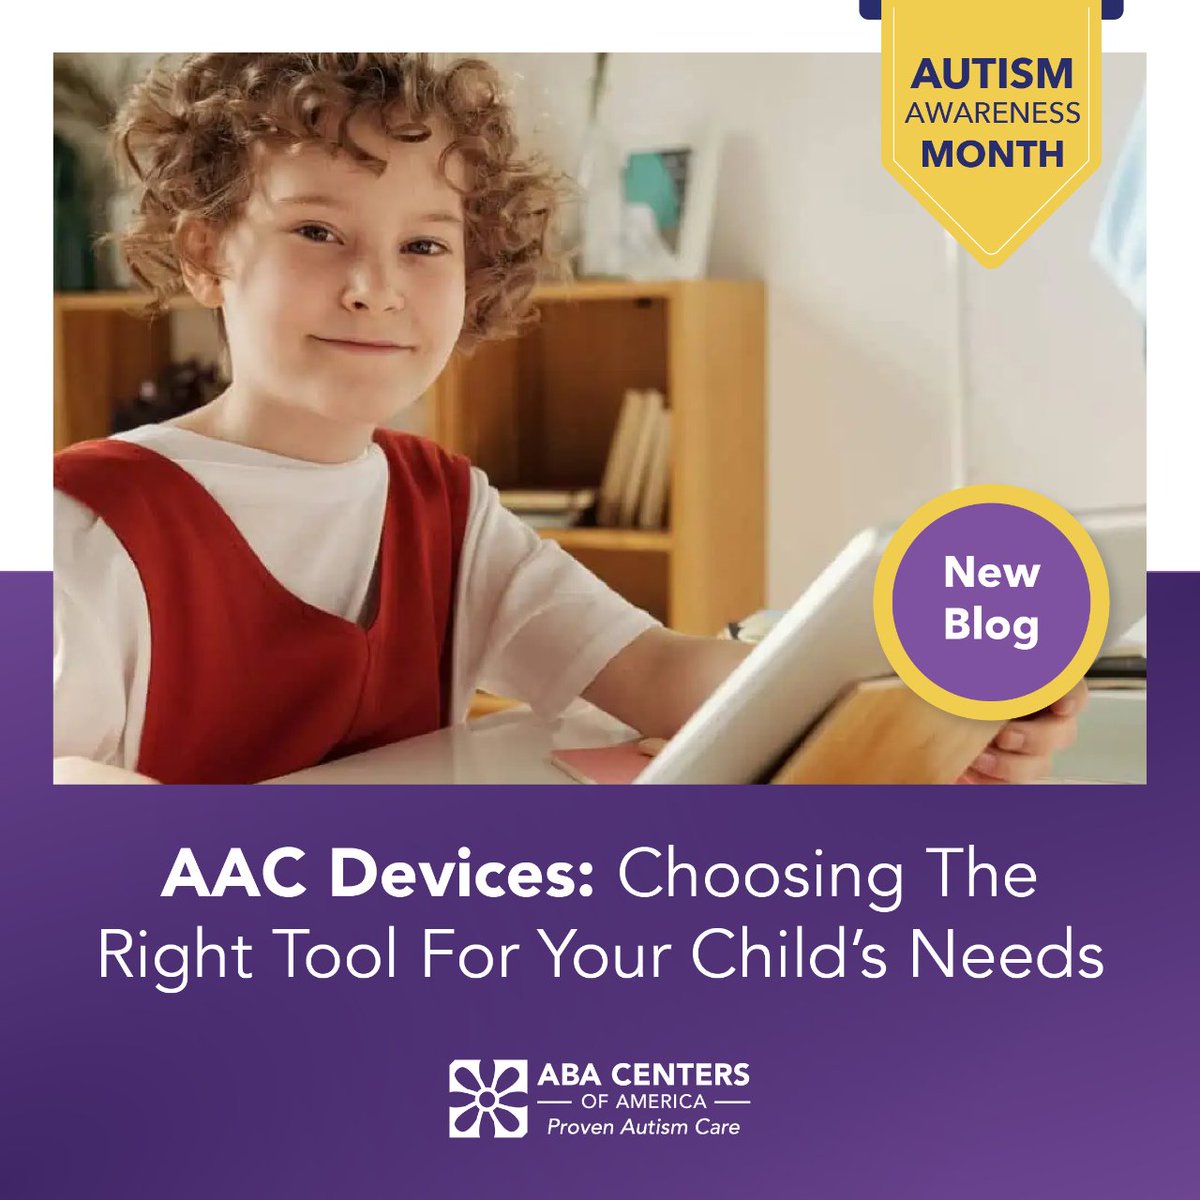 Discover how to select the right AAC device for your loved one with autism in our blog 'AAC Devices: Choosing The Right Tool For Your Child’s Needs.' Click here: bit.ly/abacaba043024fx.

#ABACentersOfAmerica #BlogPost #NewArticle #ABABlog #ABATherapy